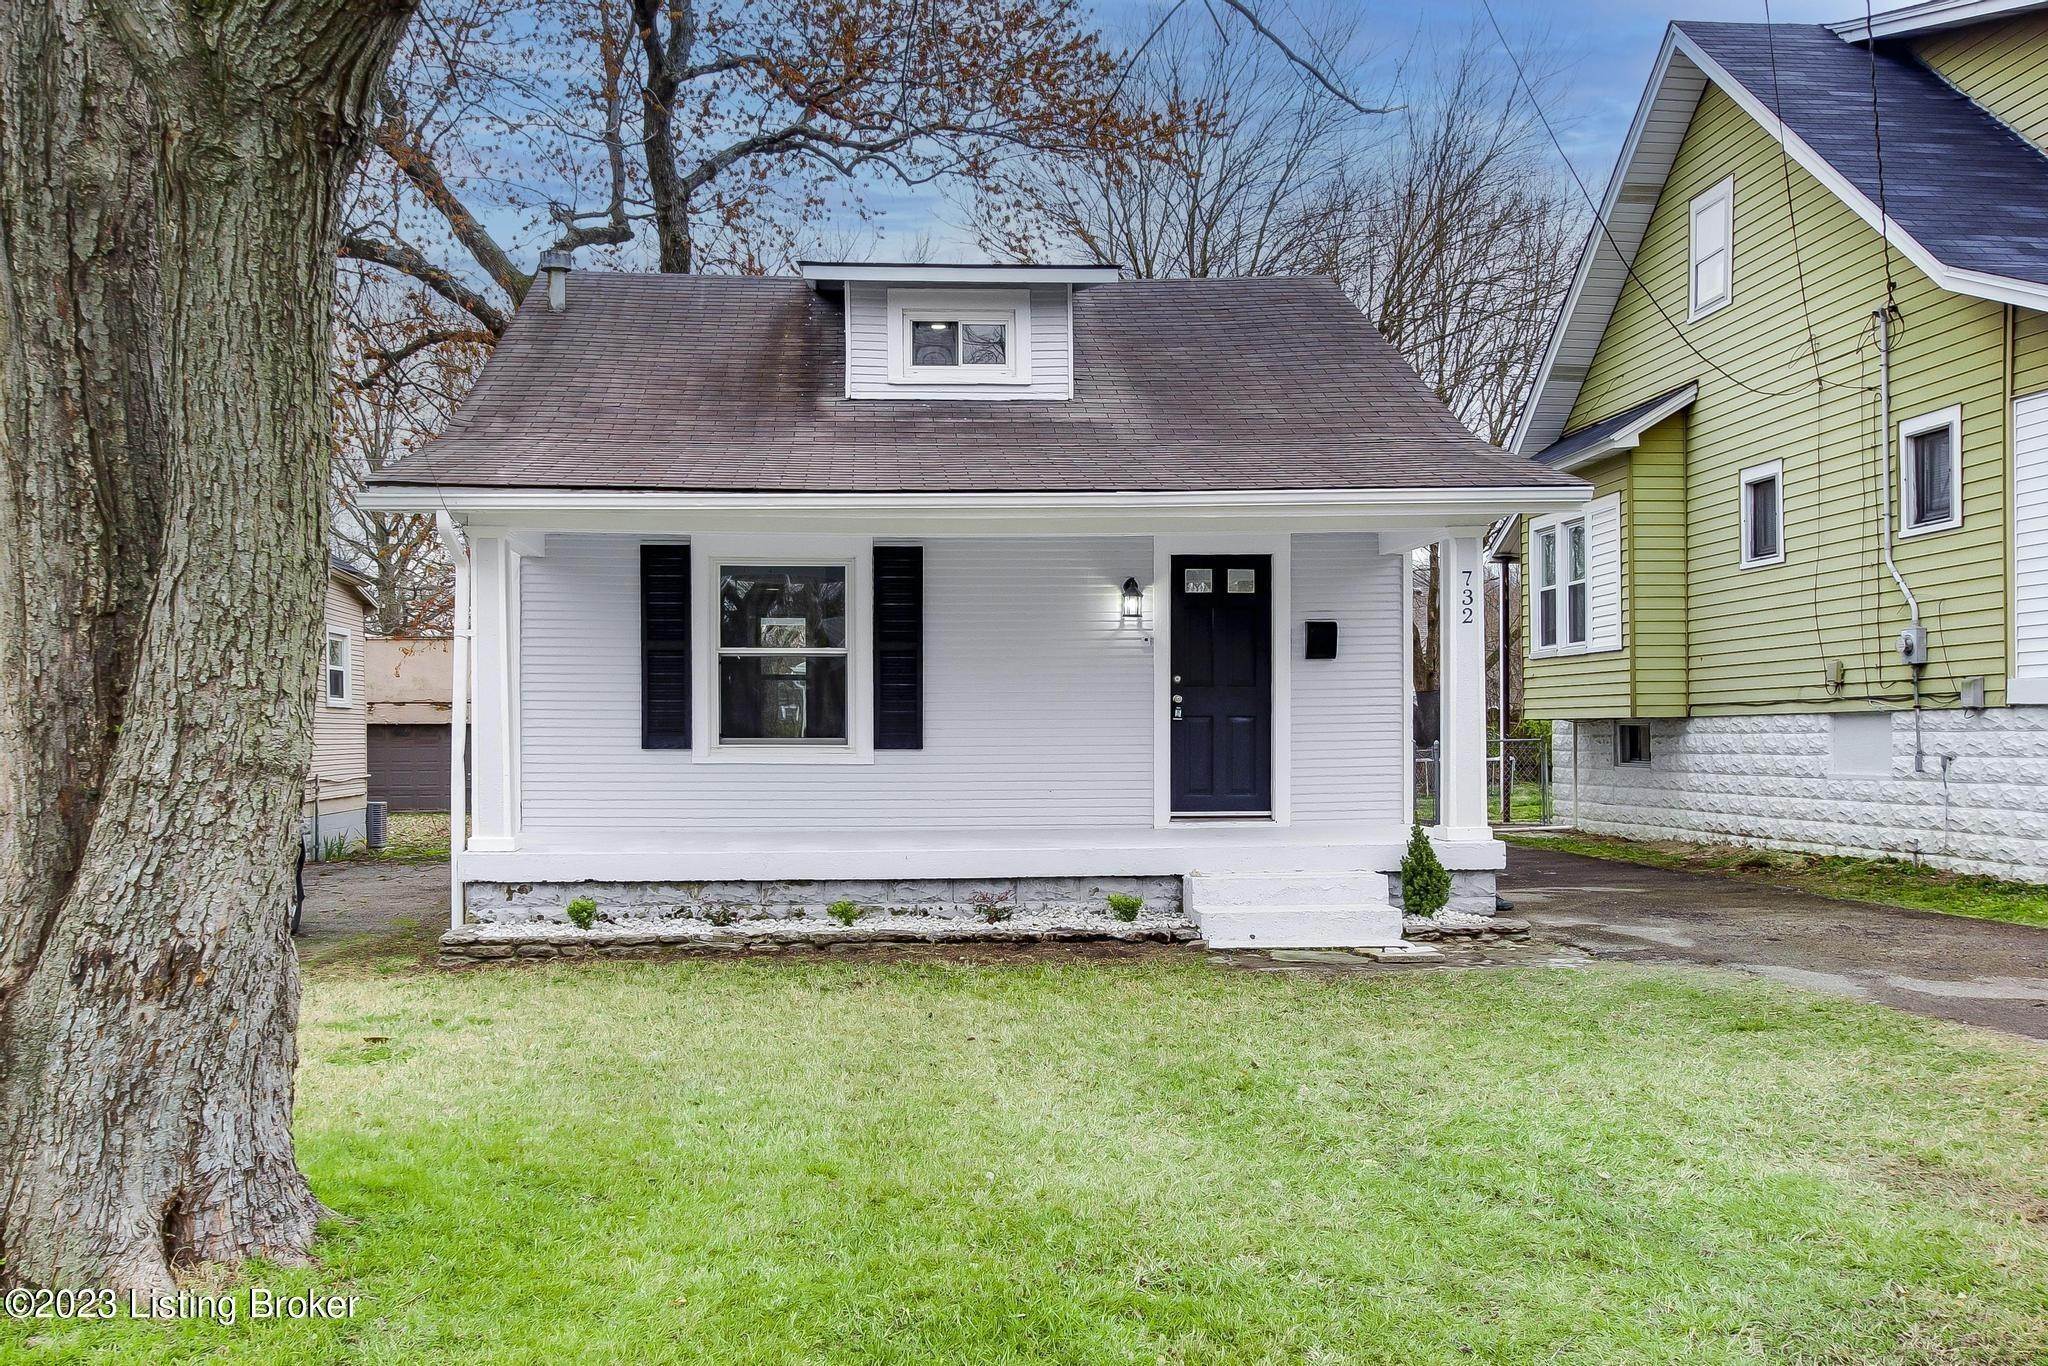 2. Single Family at Louisville, KY 40214